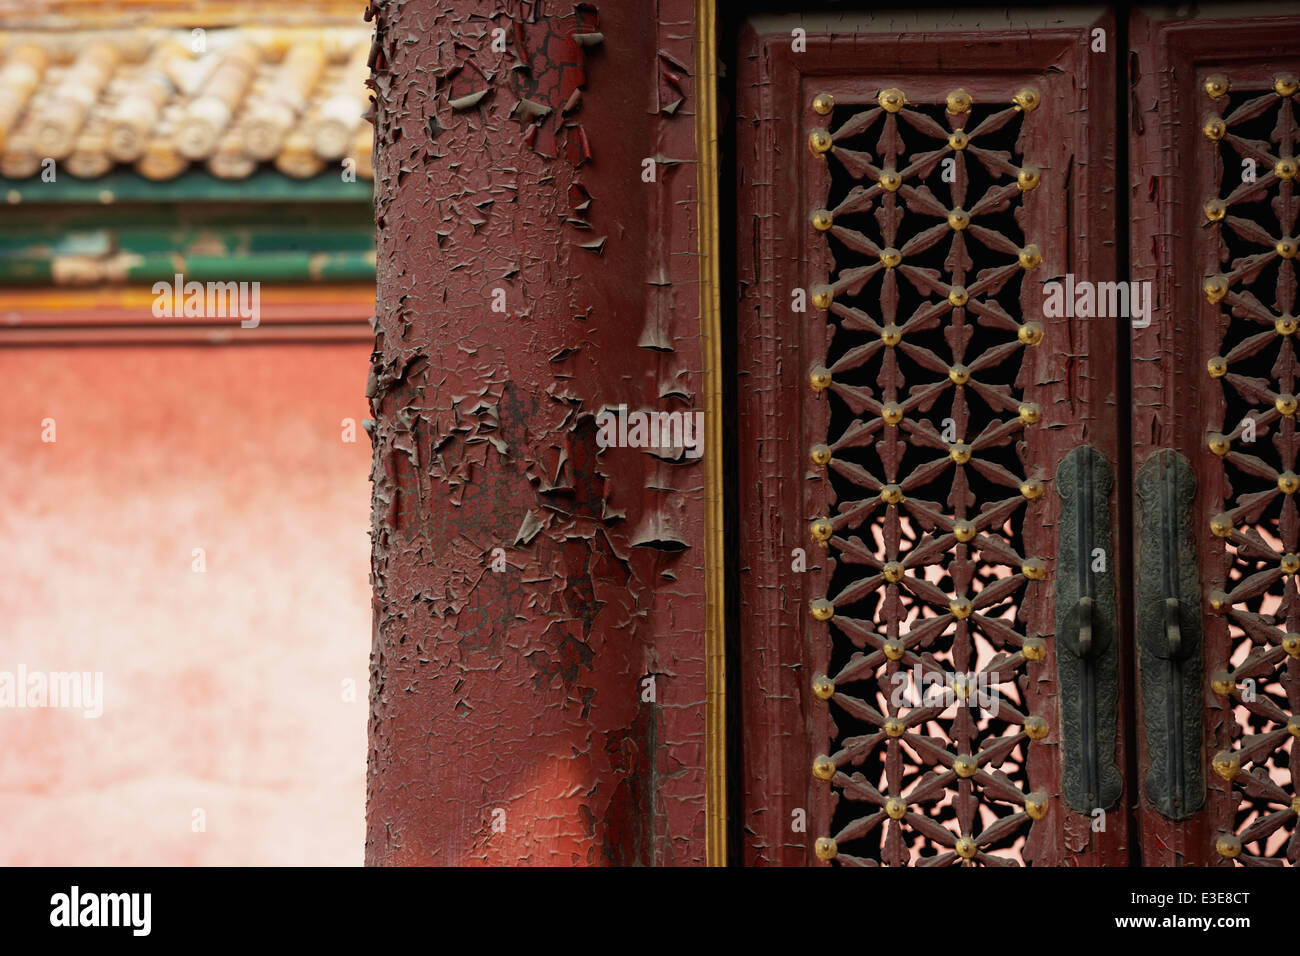 Traditional architecture inside the Forbidden City, Beijing, China Stock Photo